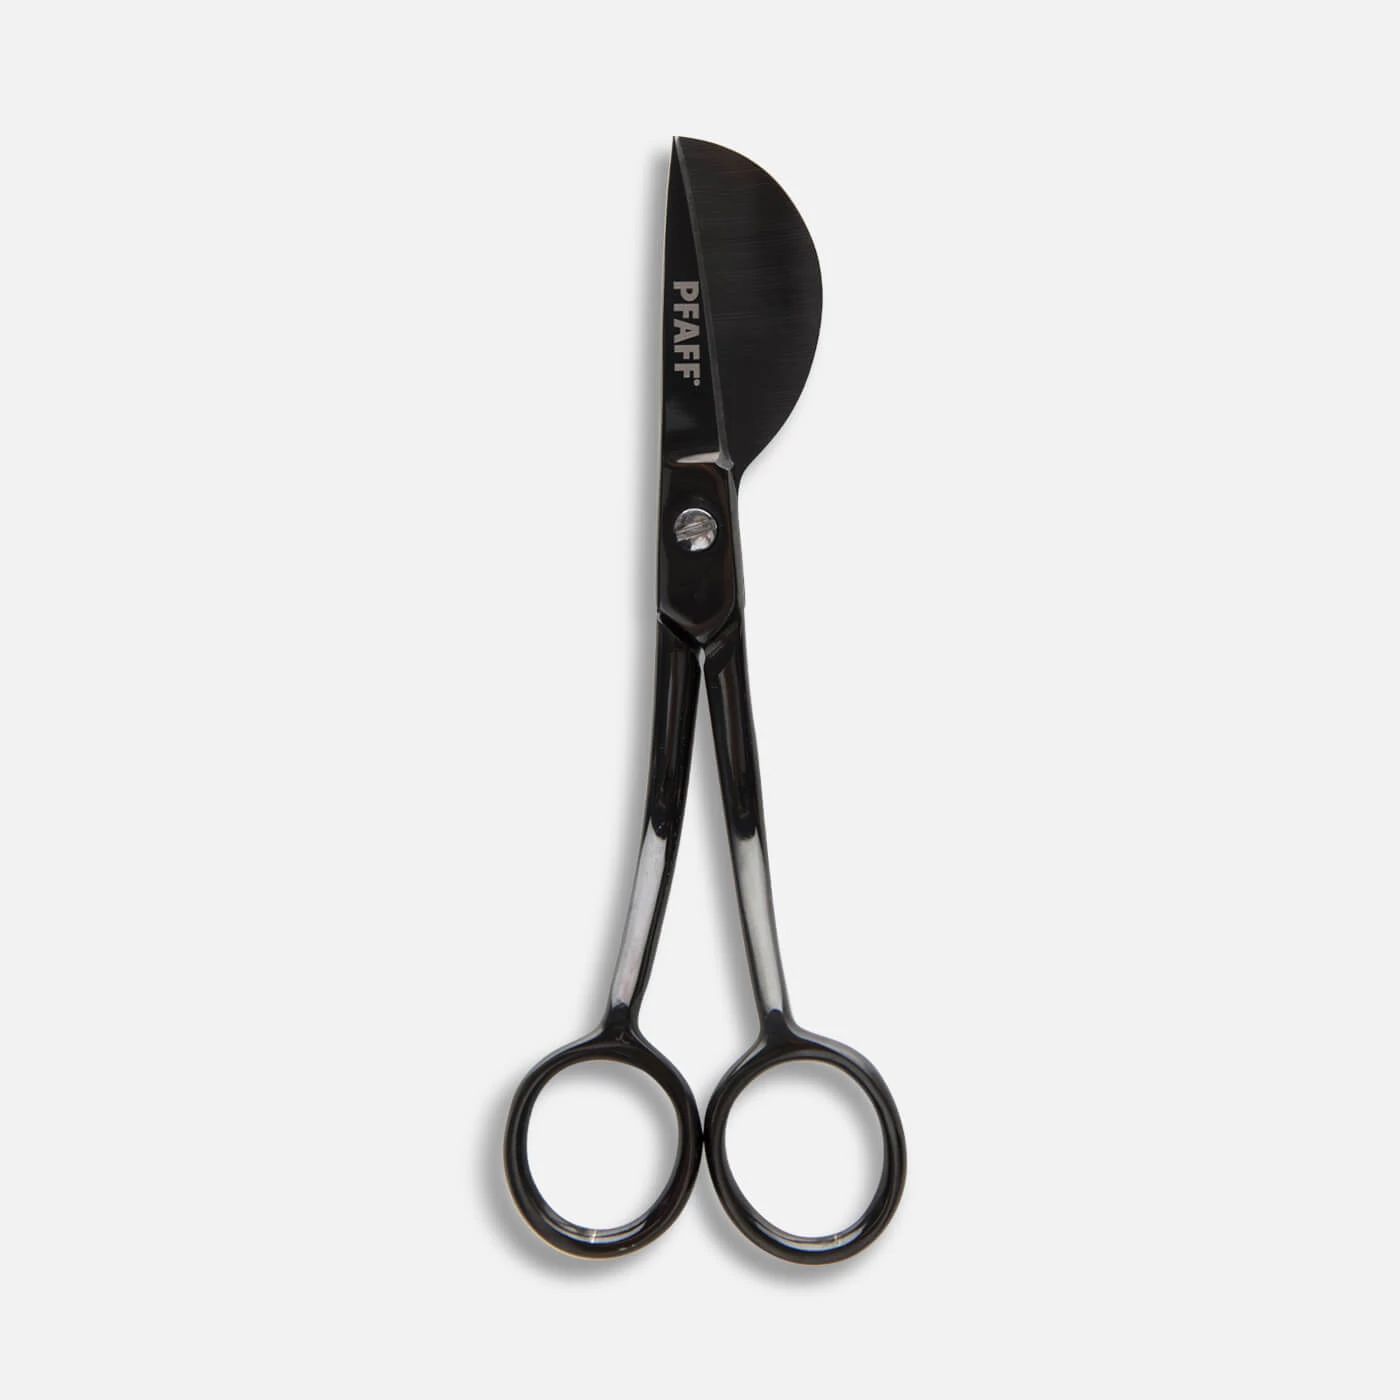 PAFASON Sharpest and Precise Stainless Steel Curved & Straight Thread Cutting Scissors with Protective Cover - Ideal for Embroidery, Quilting, Sewing